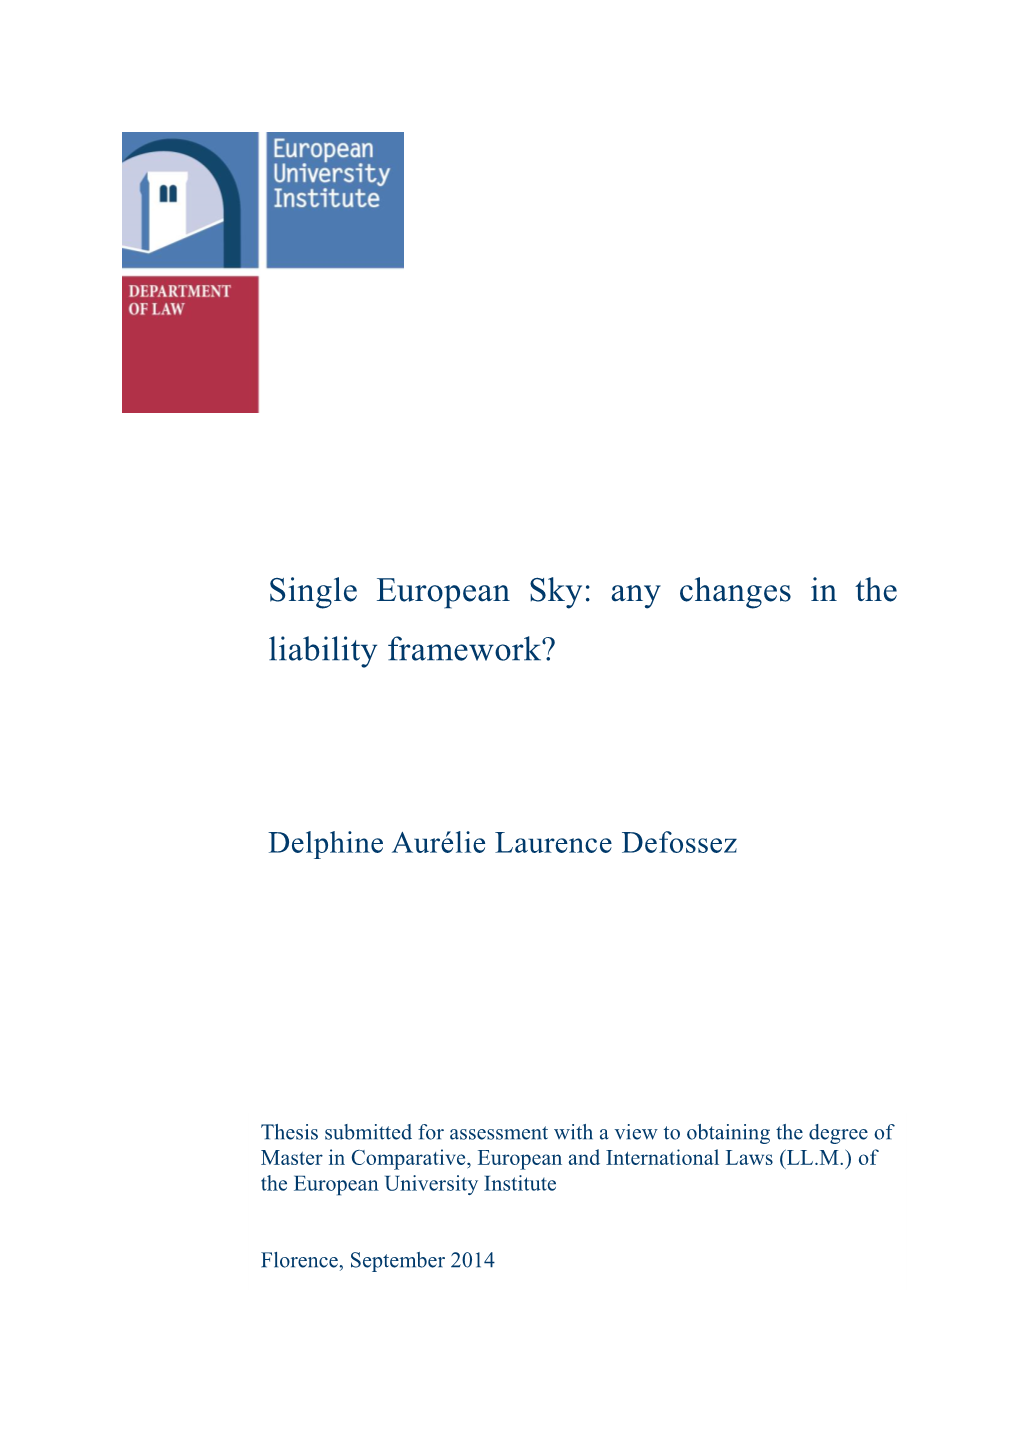 Single European Sky: Any Changes in the Liability Framework?